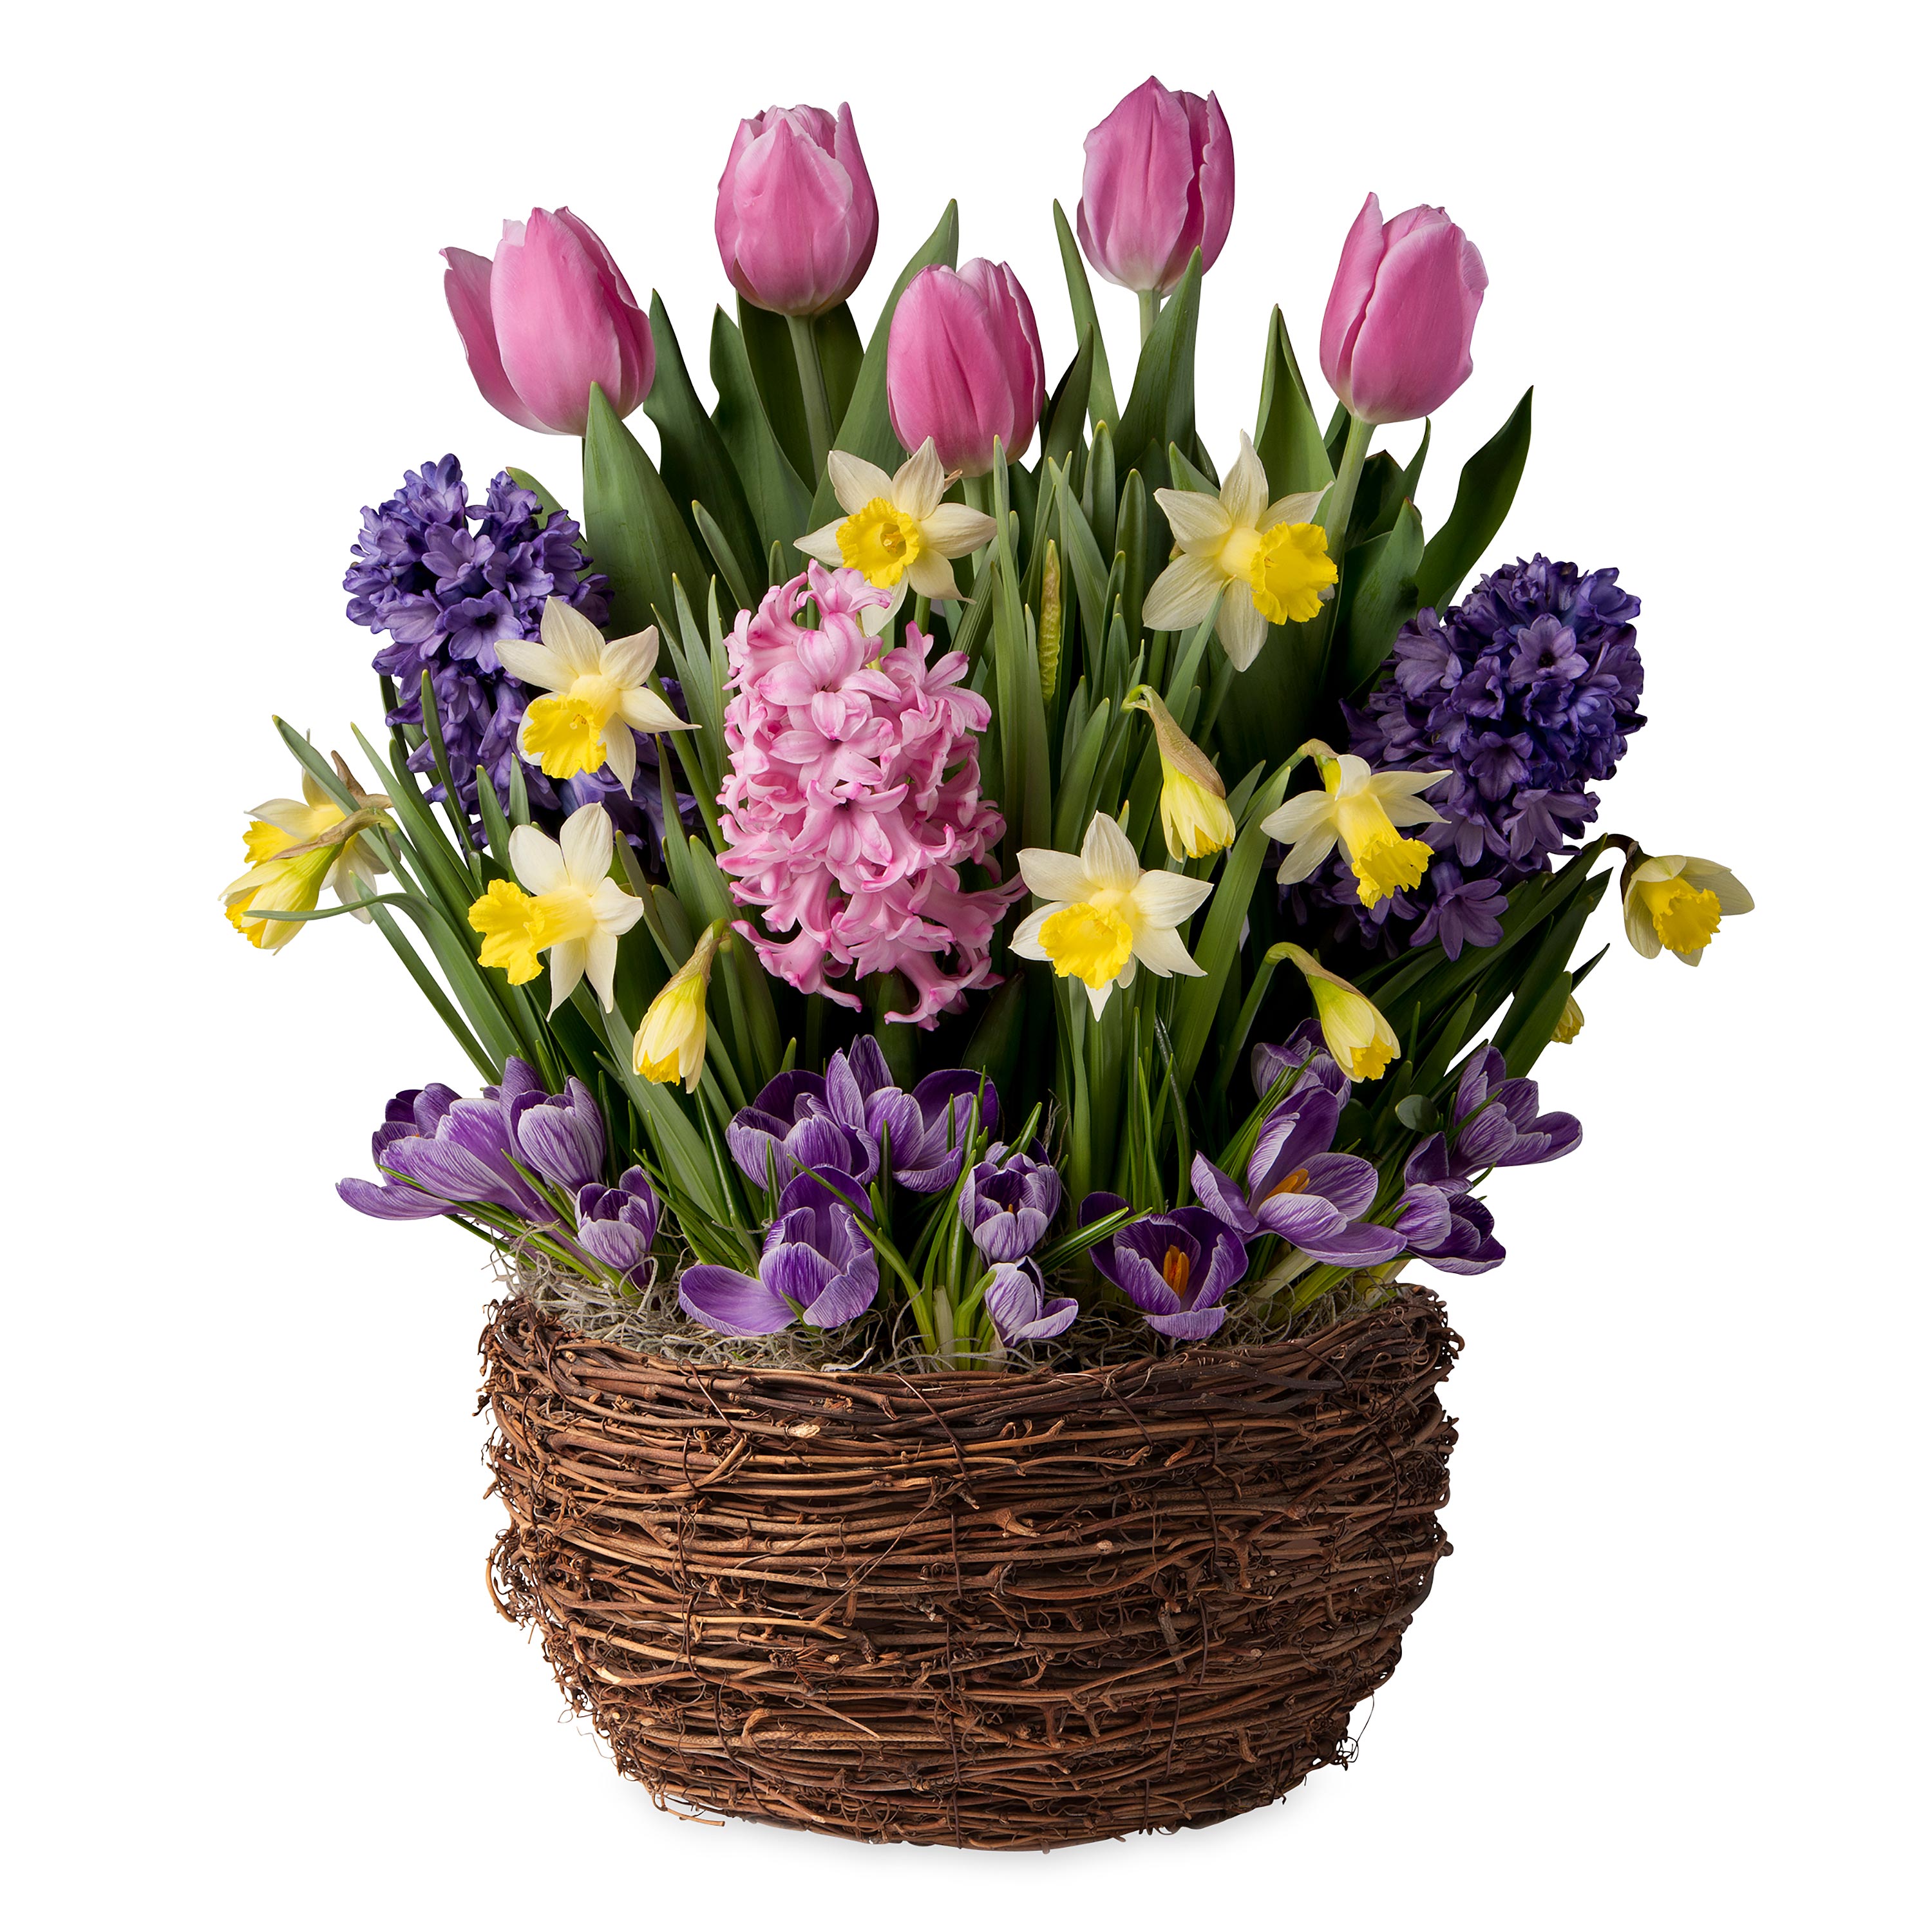 Pastel Spring Mixed Flower Bulb Garden with Narcissus, Tulips, Crocus and Hyacinths